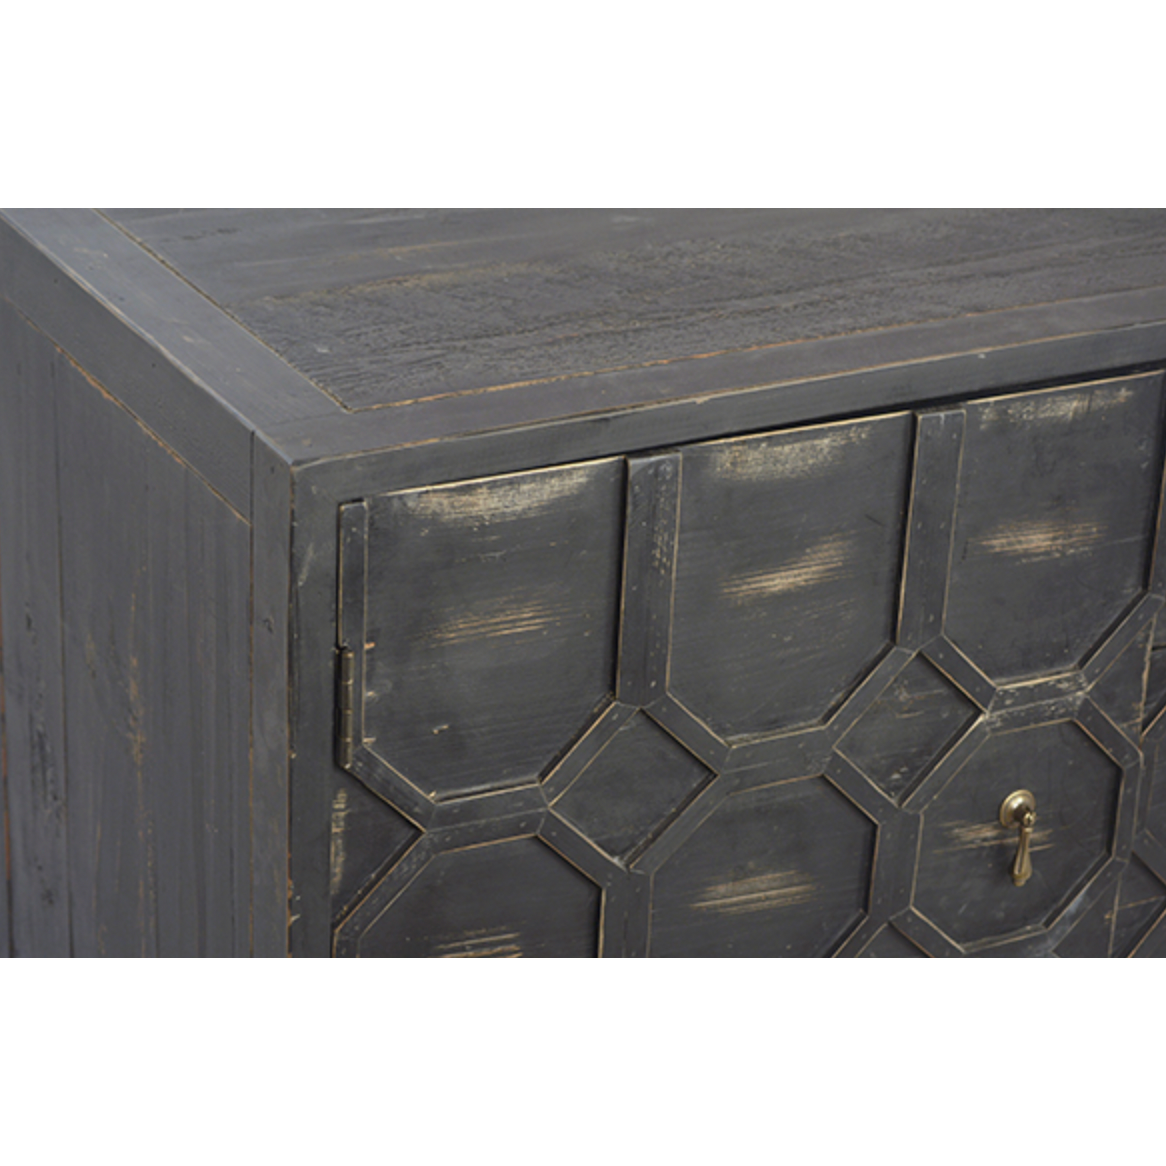 The Harten cabinet is beautifully crafted of black stained pine.  Its versatile cabinet drawer combo is perfect for both media and dining room storage.  Size: 63"l x 20"d x 31"h  Finish may vary slightly by piece as this is a hand-crafted product.  Please allow 3-5 weeks for shipping.